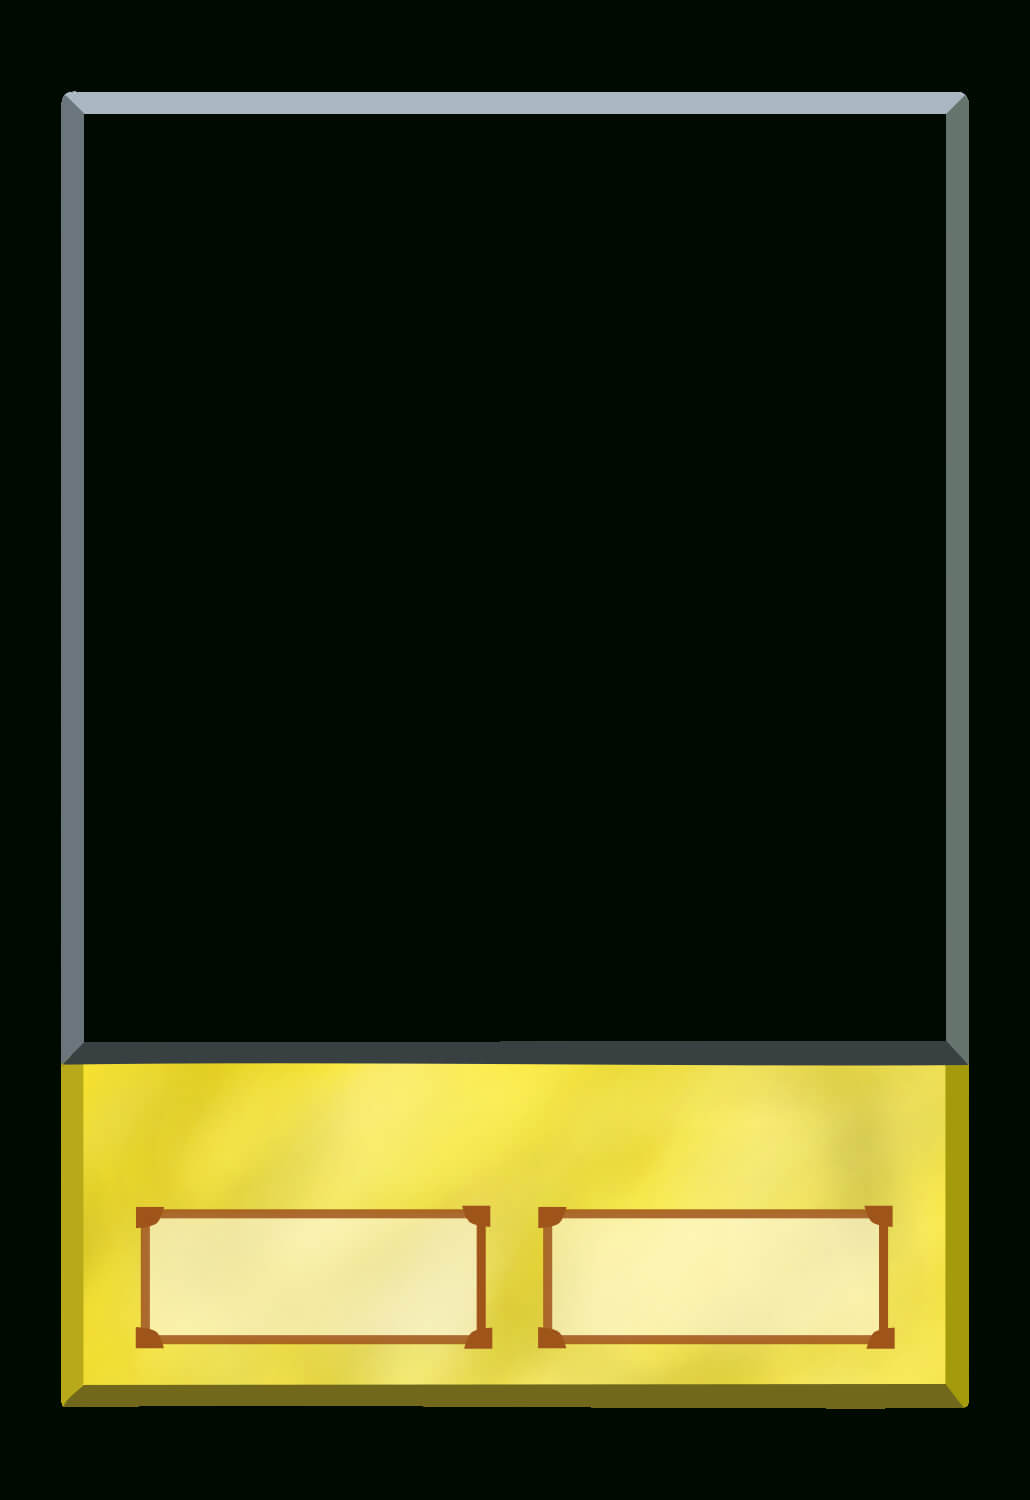 File:yu Gi Oh Anime Style Cards Normal Monster Template For Yugioh Card Template